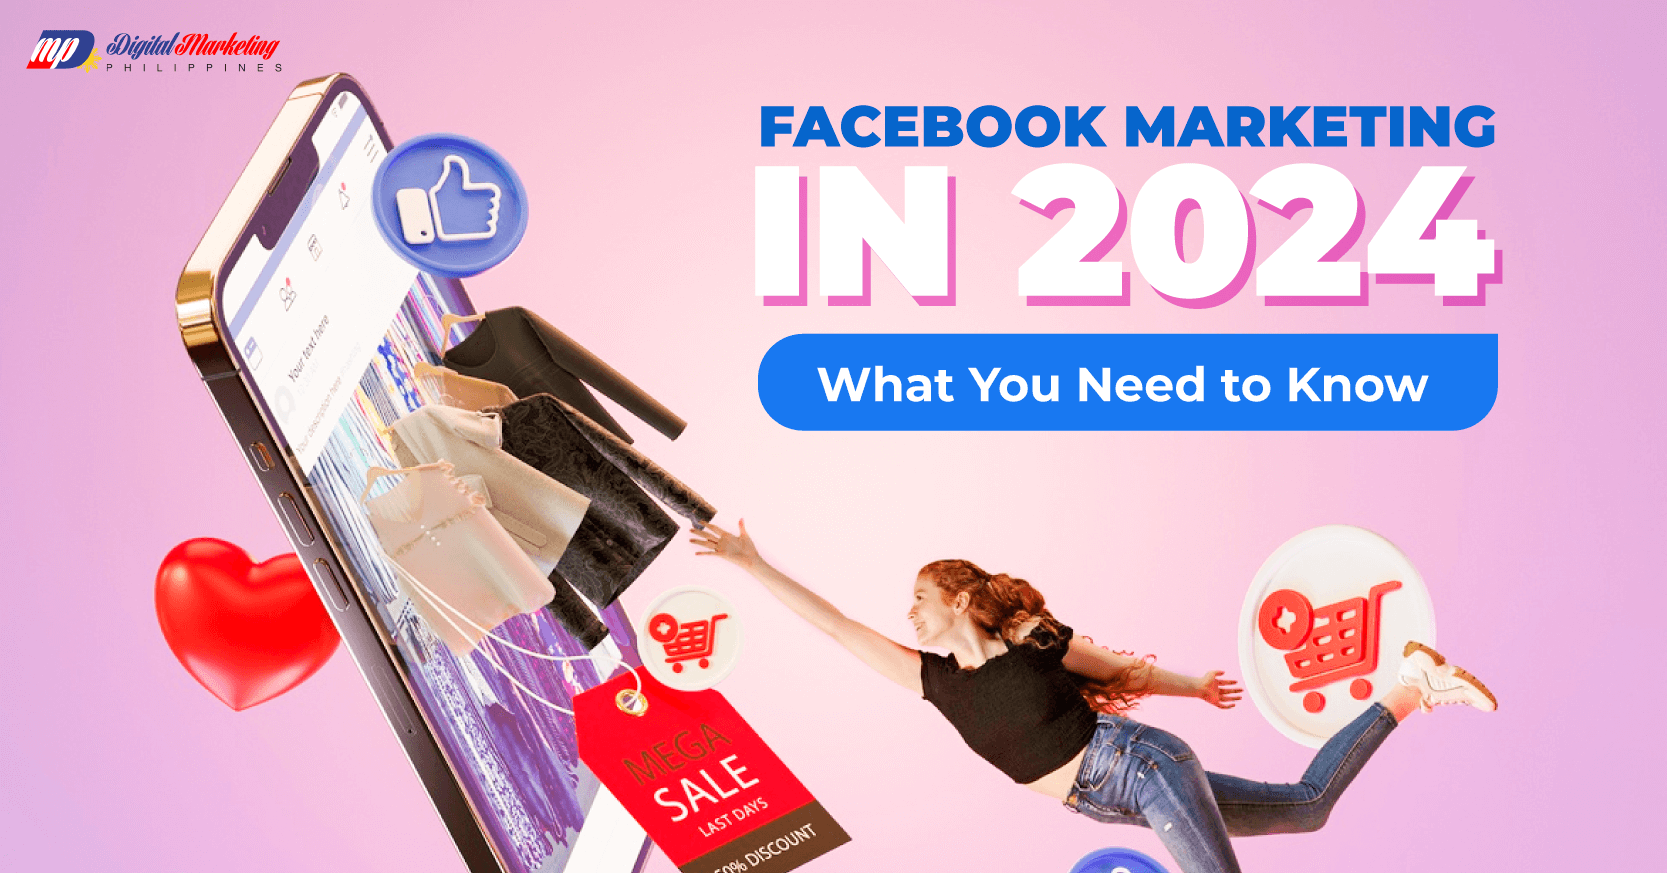 Facebook Marketing in 2024 - What You Need to Know